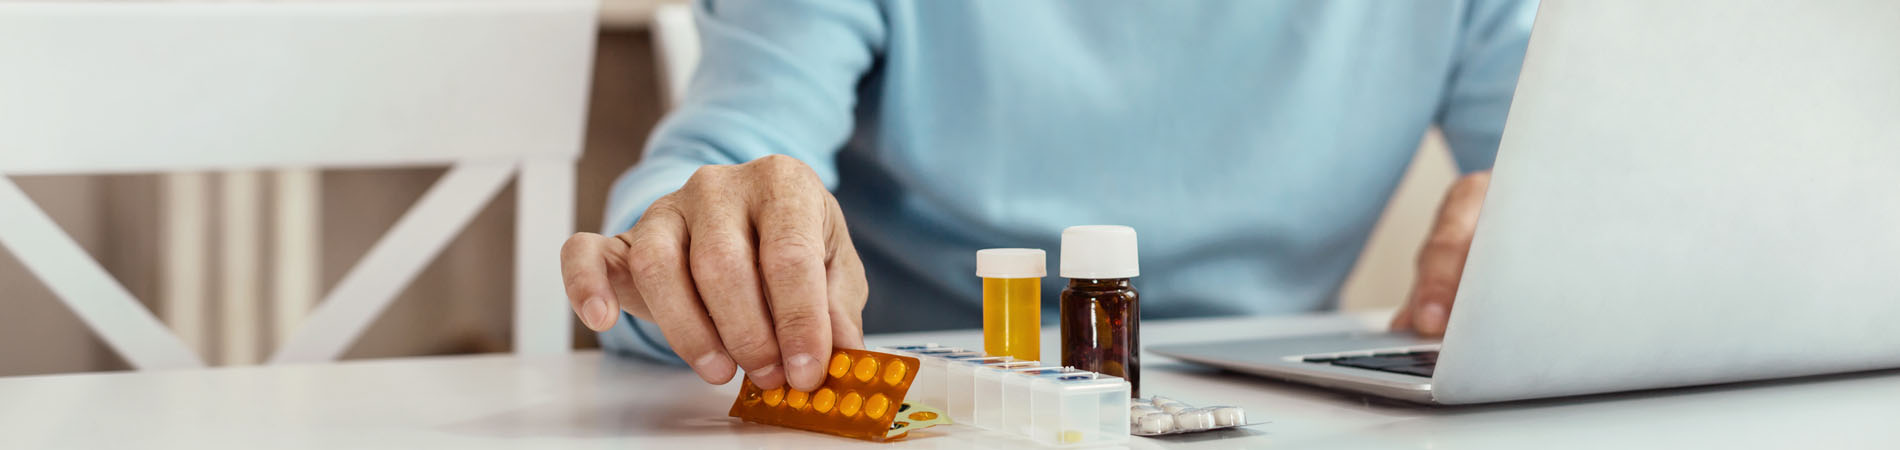 Patient portal usage to help an elderly man be compliant with his medications